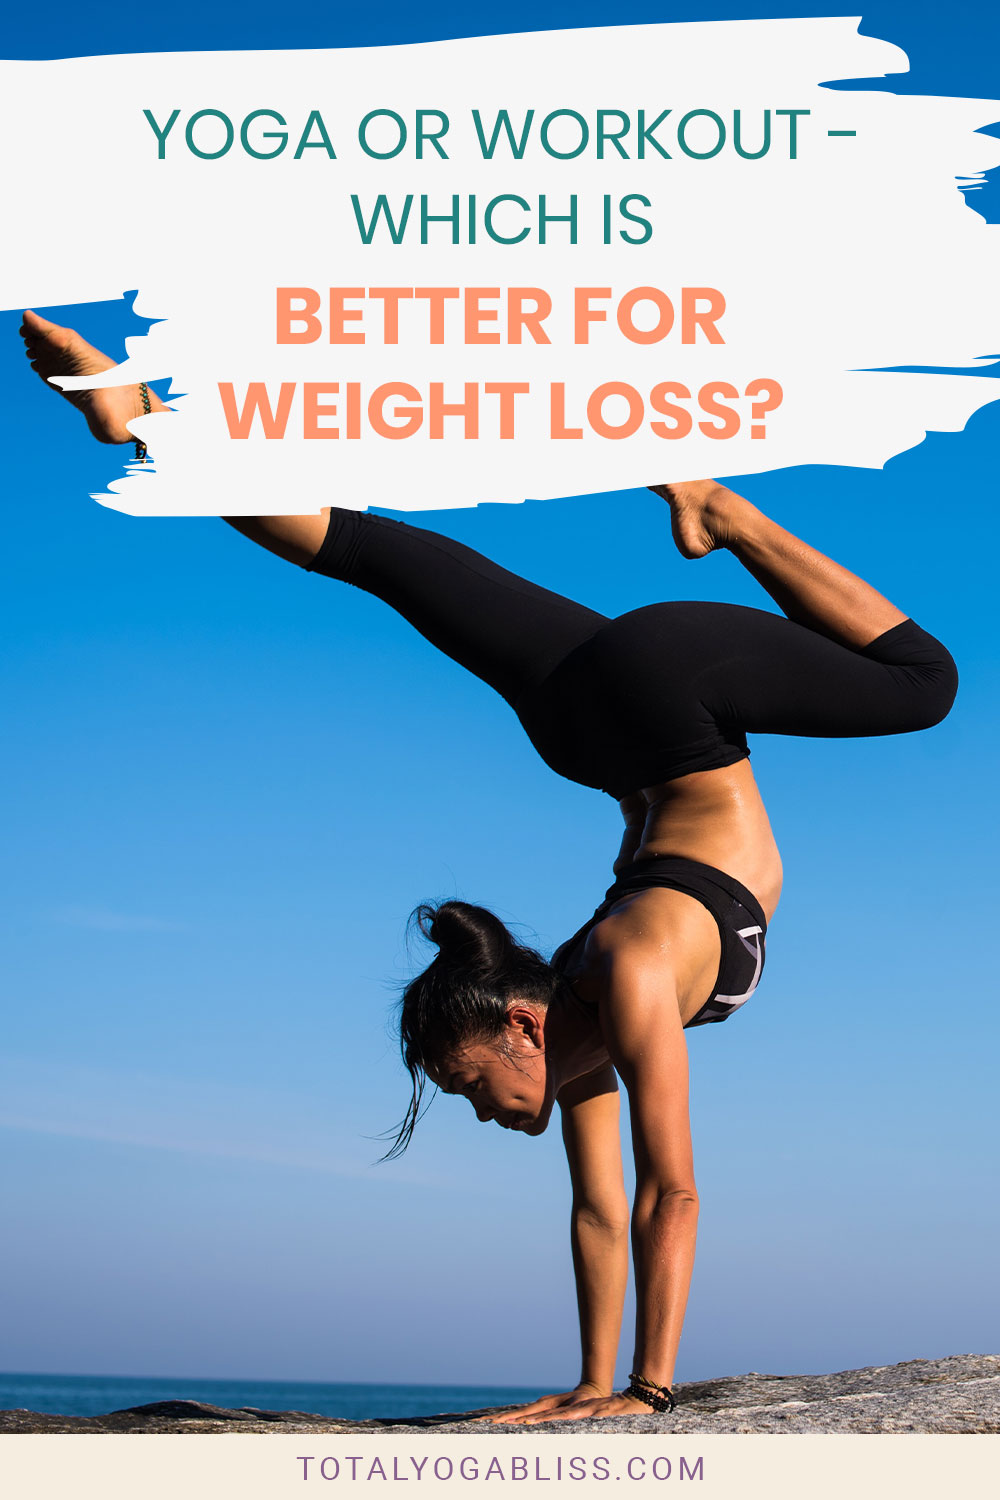 Yoga Or Workout – Which Is Better For Weight Loss?